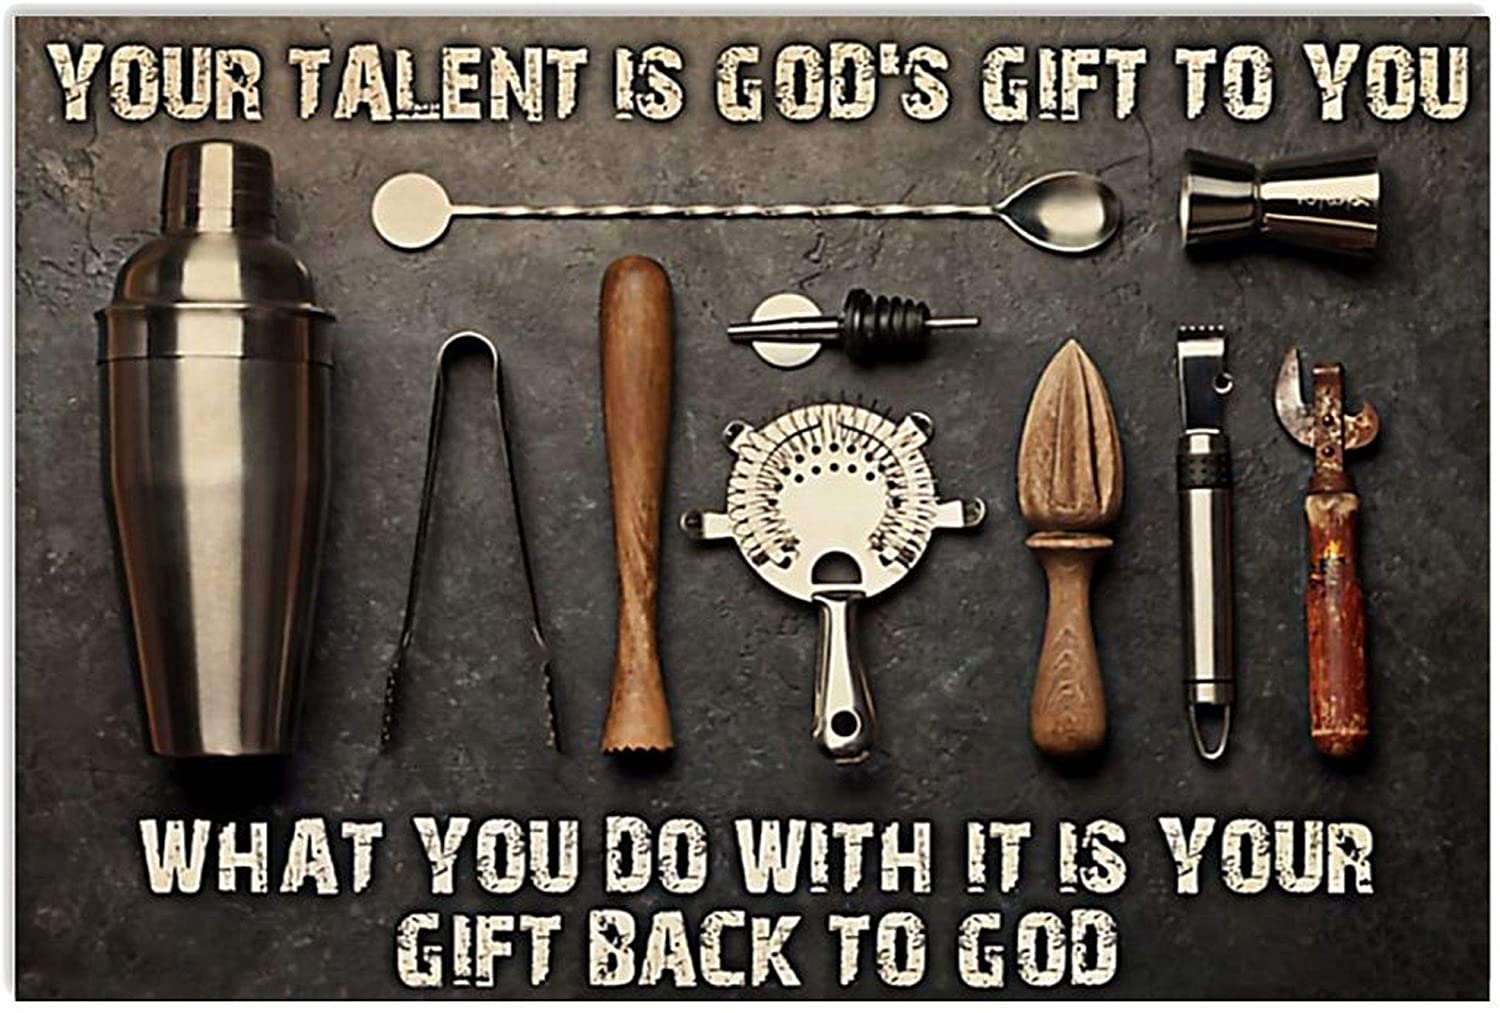 ANDIEZ Bartender Your Talent is God’s Gift to You What You Do with It is Your Gift Back to God Poster